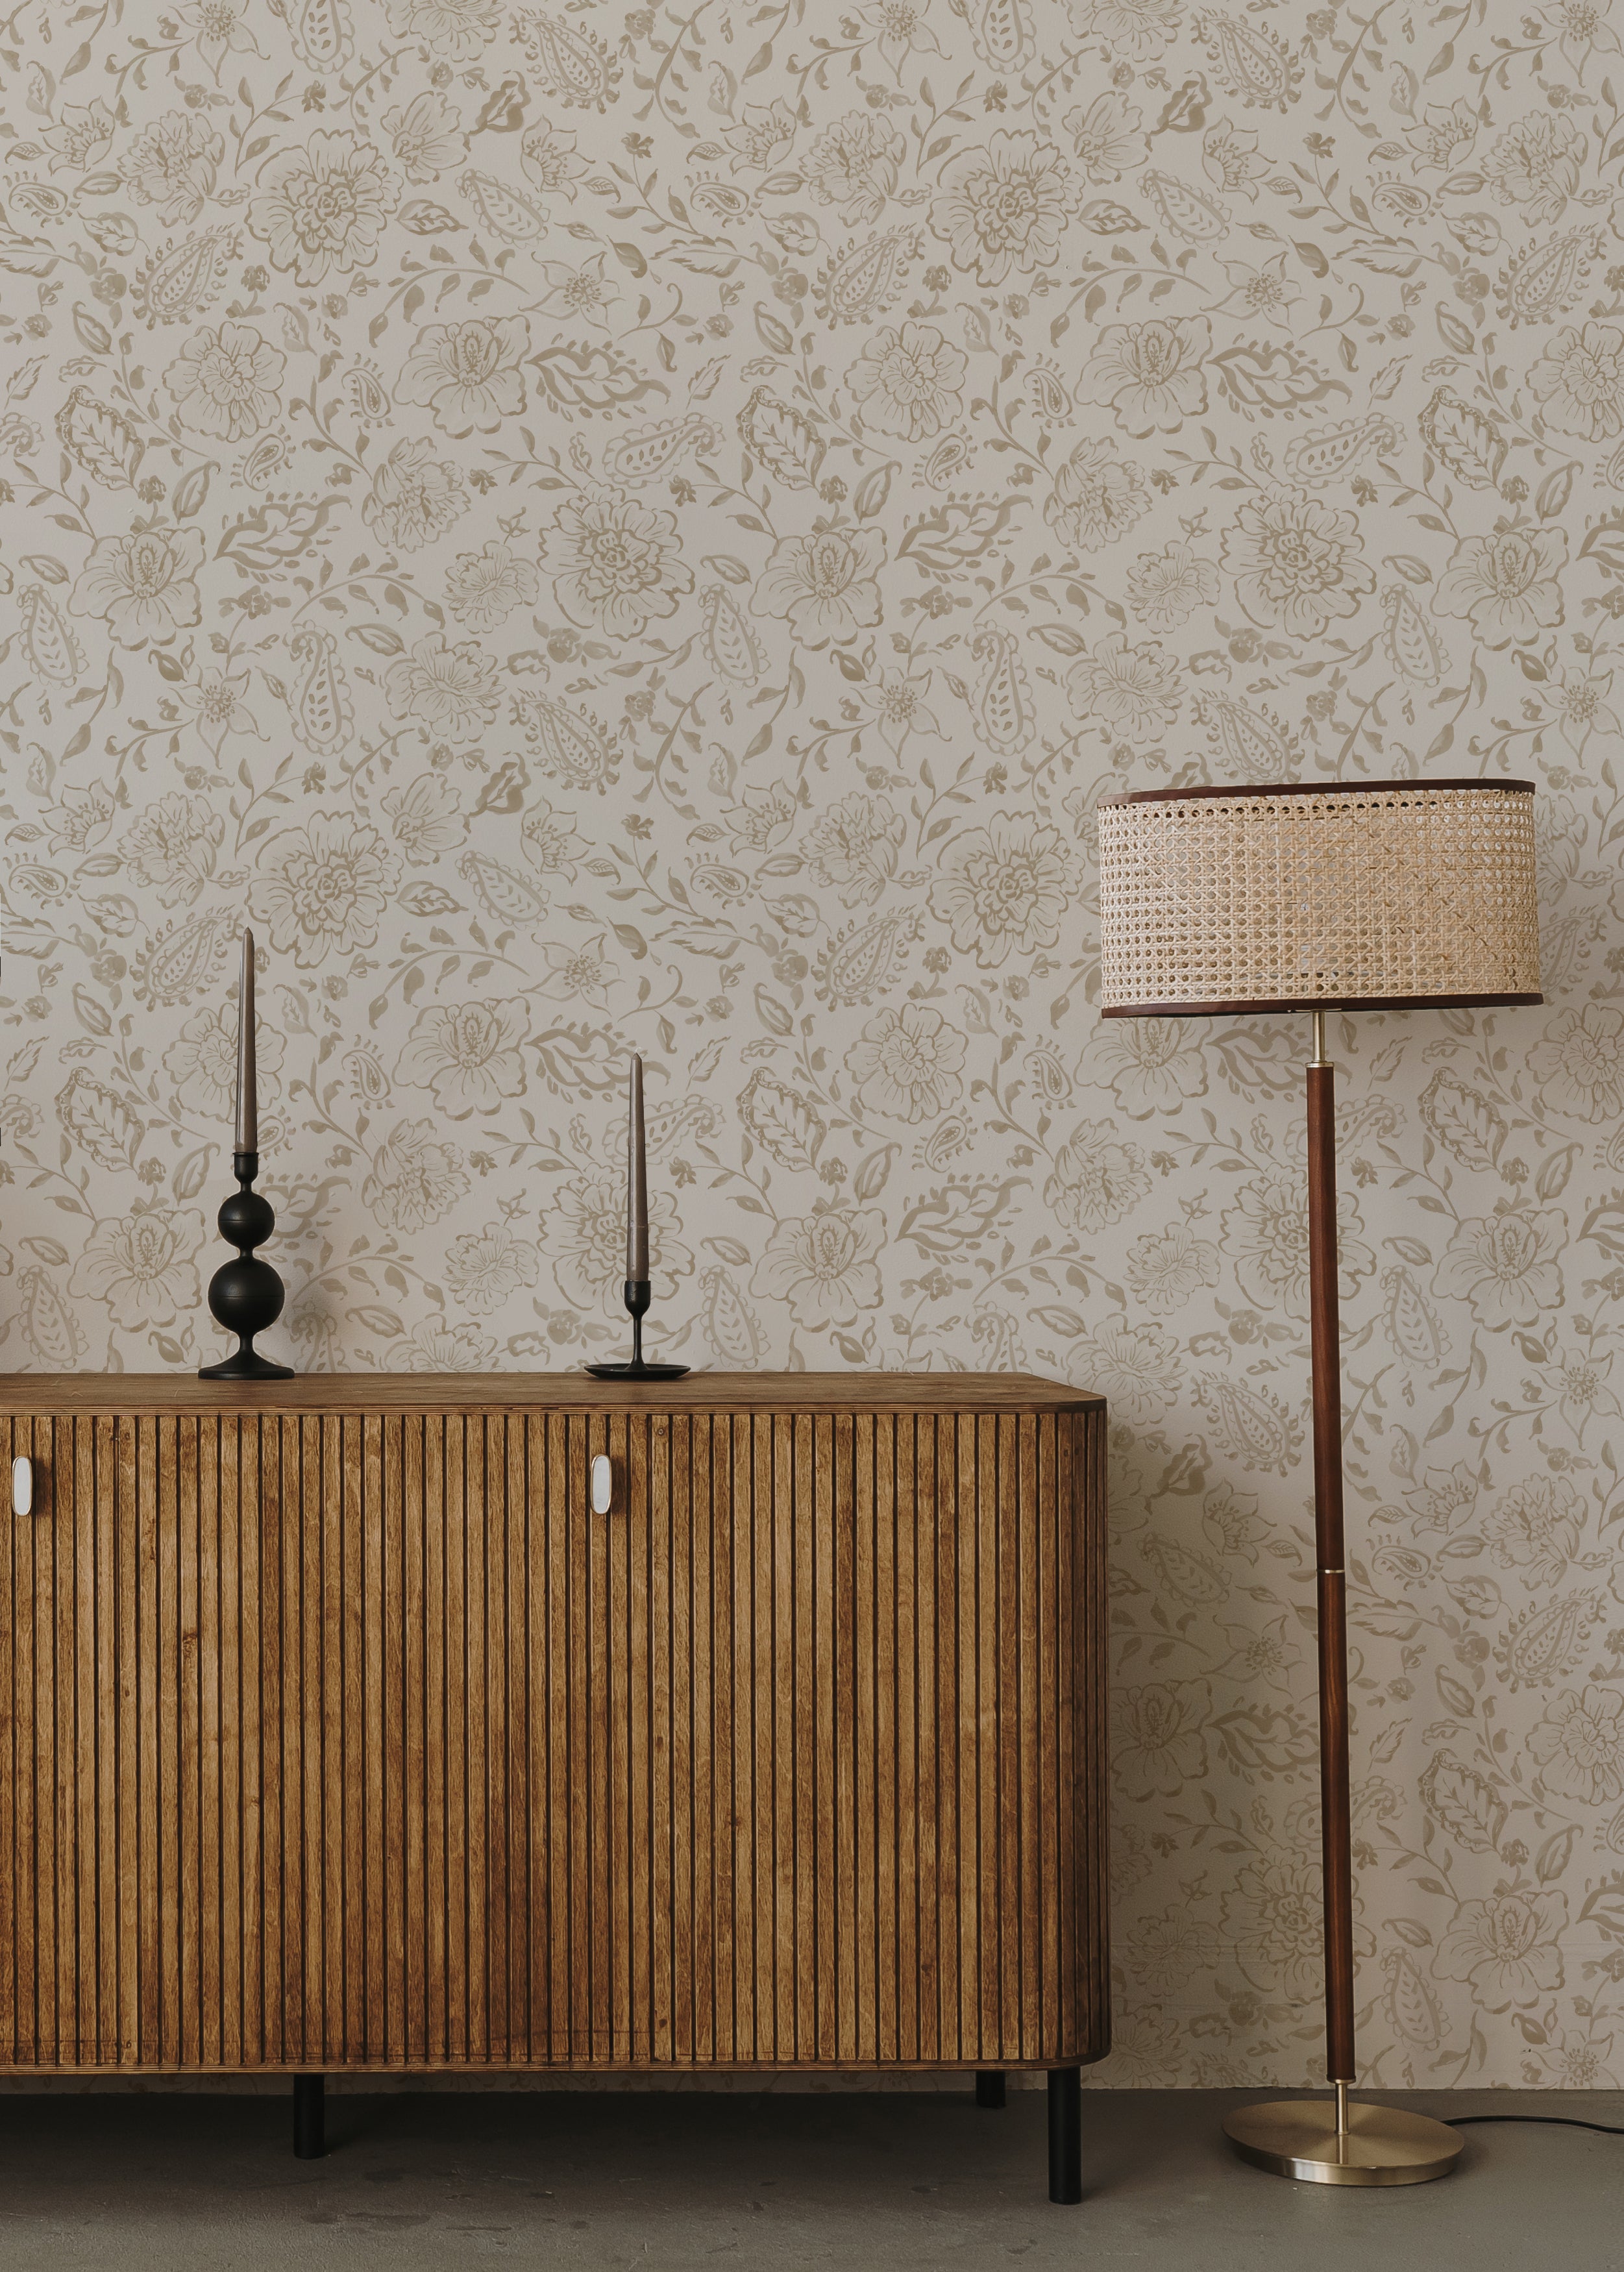 Close-up of Watercolour Paisley Wallpaper pattern with modern lamp and decor items on a wooden desk